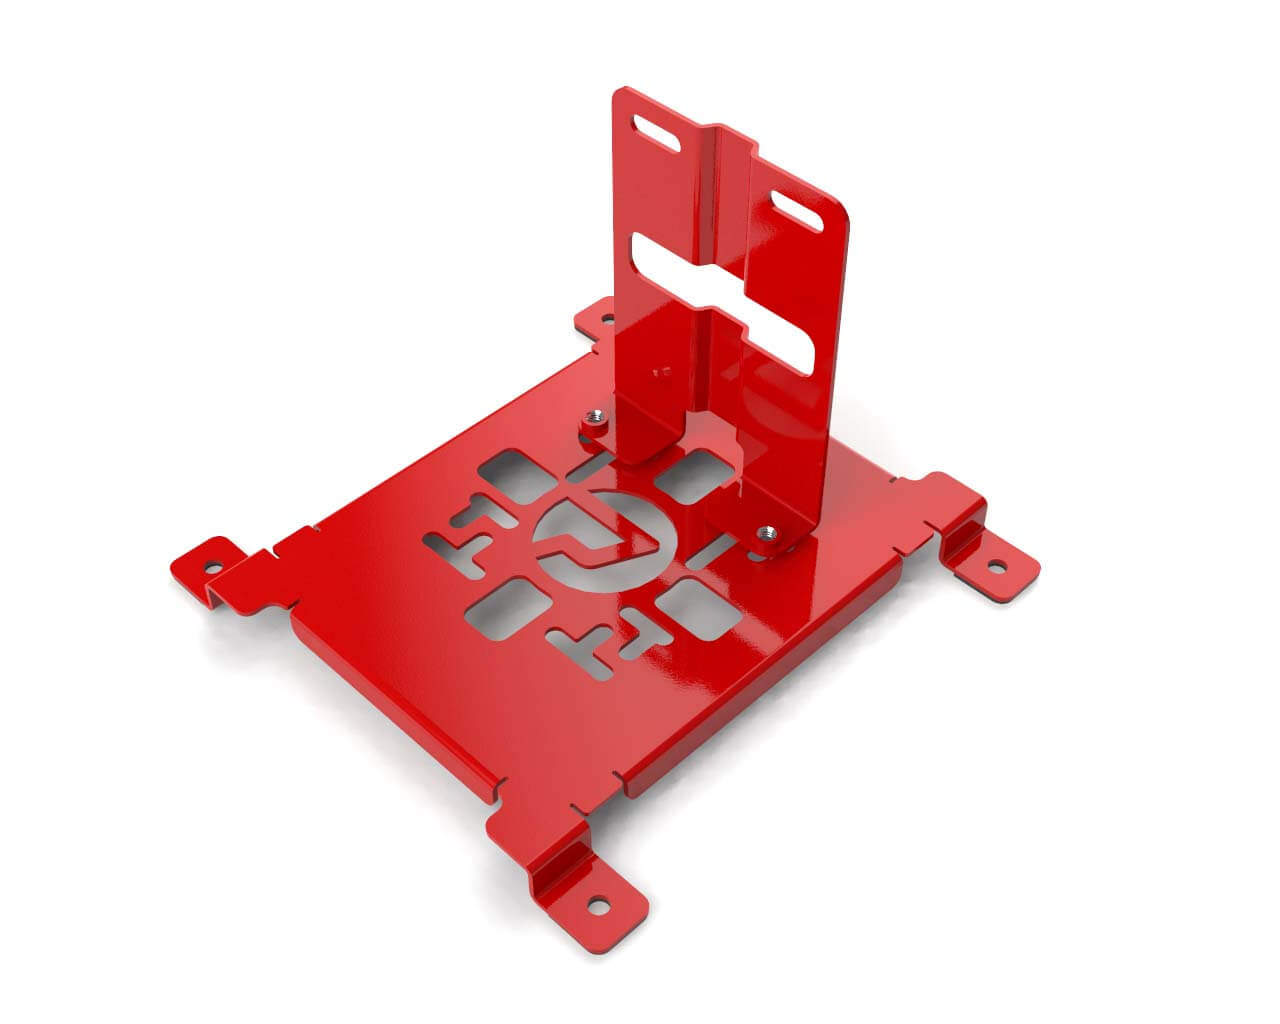 PrimoChill SX CTR2 Spider Mount Bracket Kit - 140mm Series - PrimoChill - KEEPING IT COOL Razor Red